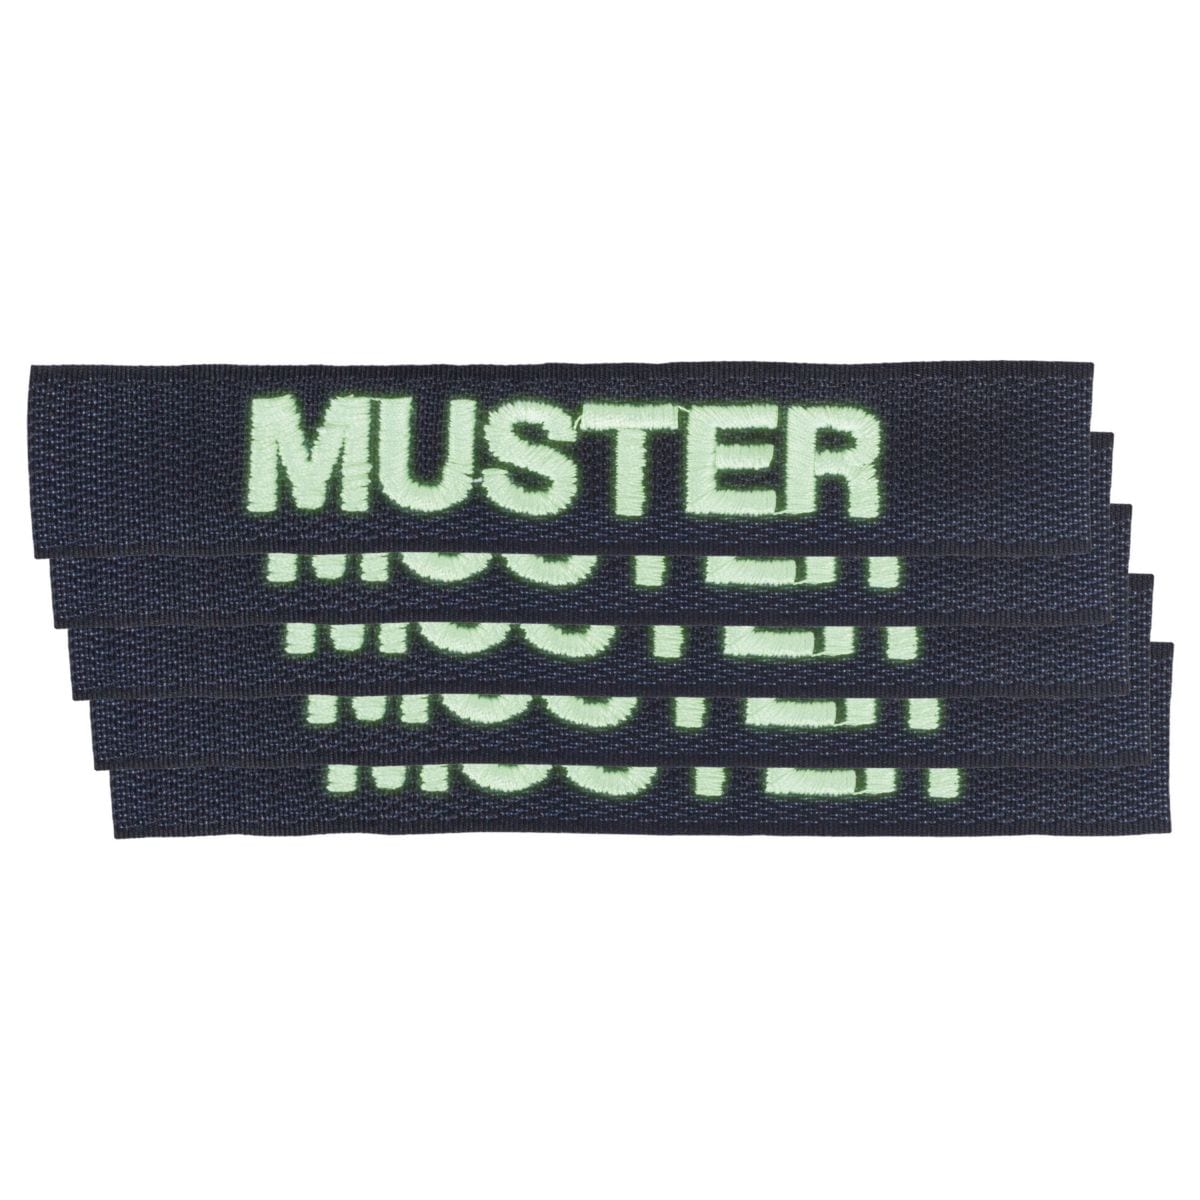 Purchase the Name tapes 5 pack , navy blue, phosphorescent